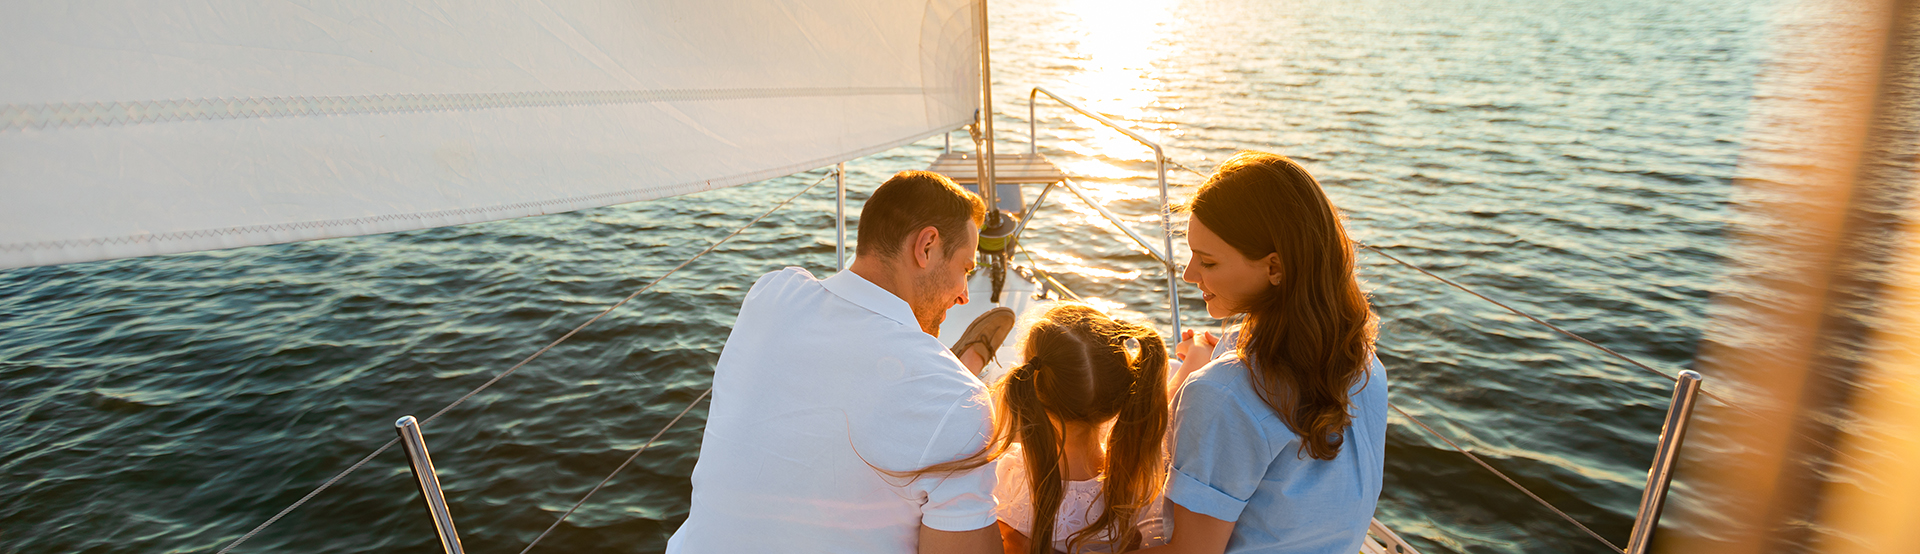 Private Client Family Office - Family on Yacht 